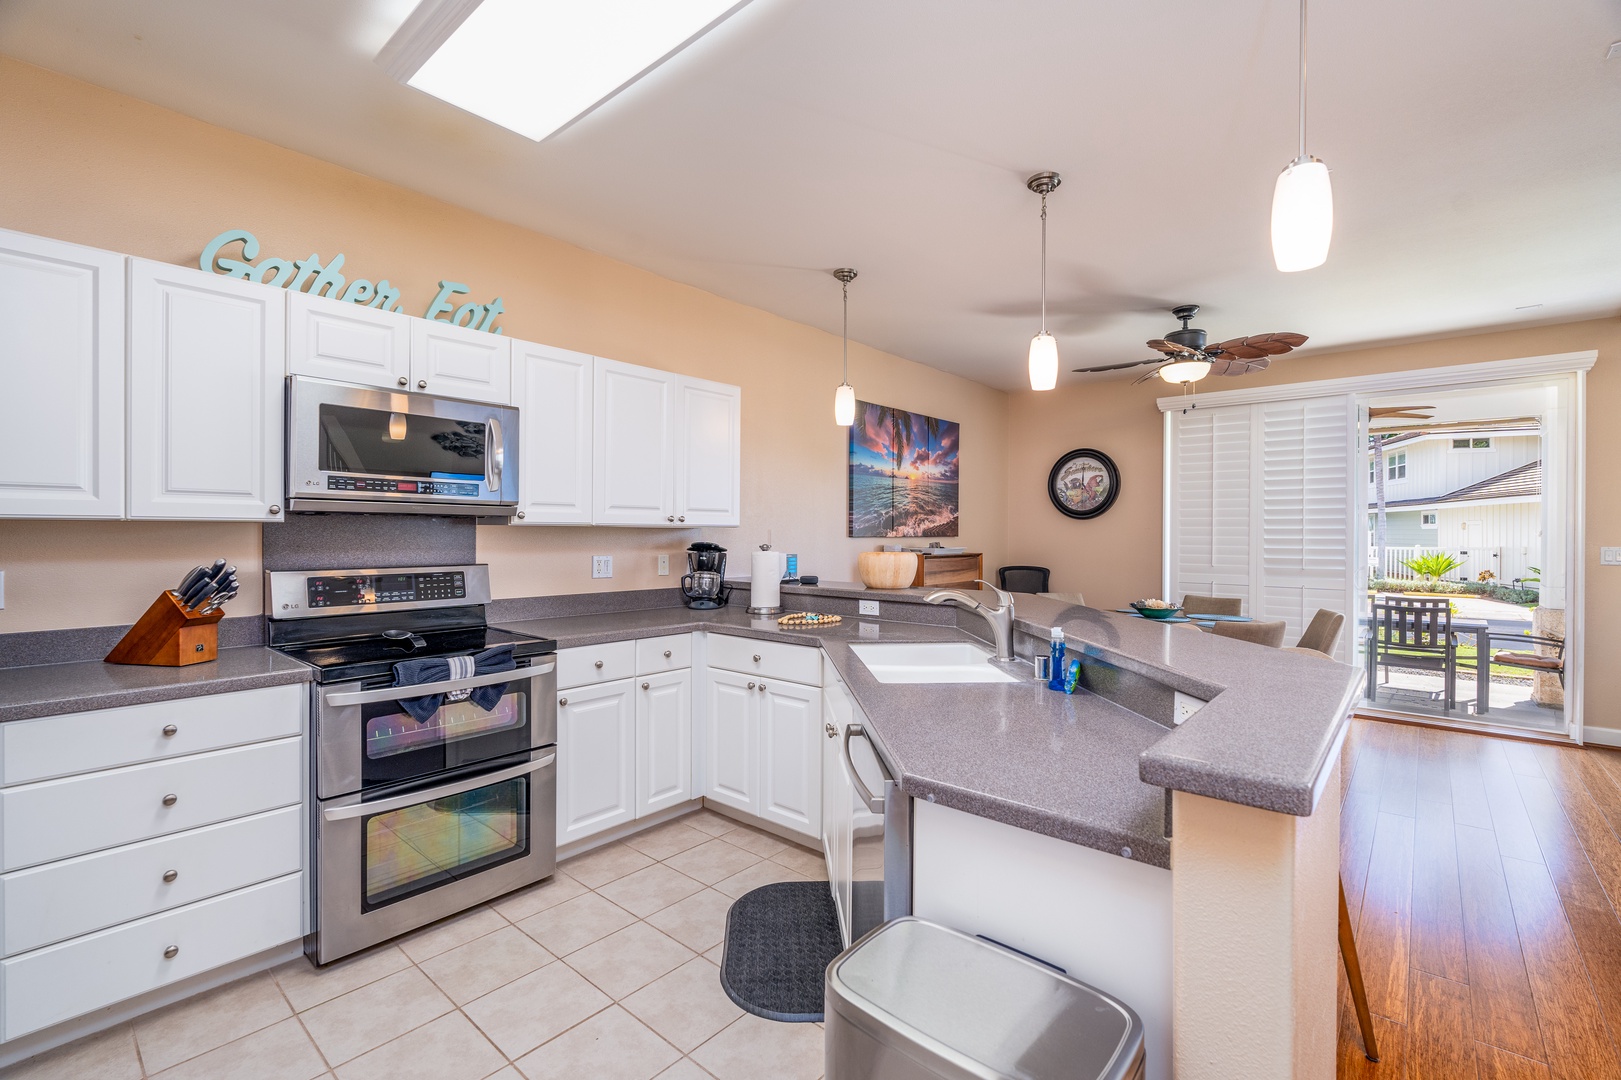 Kapolei Vacation Rentals, Ko Olina Kai 1081C - The kitchen is full of amenities for your culinary adventures.